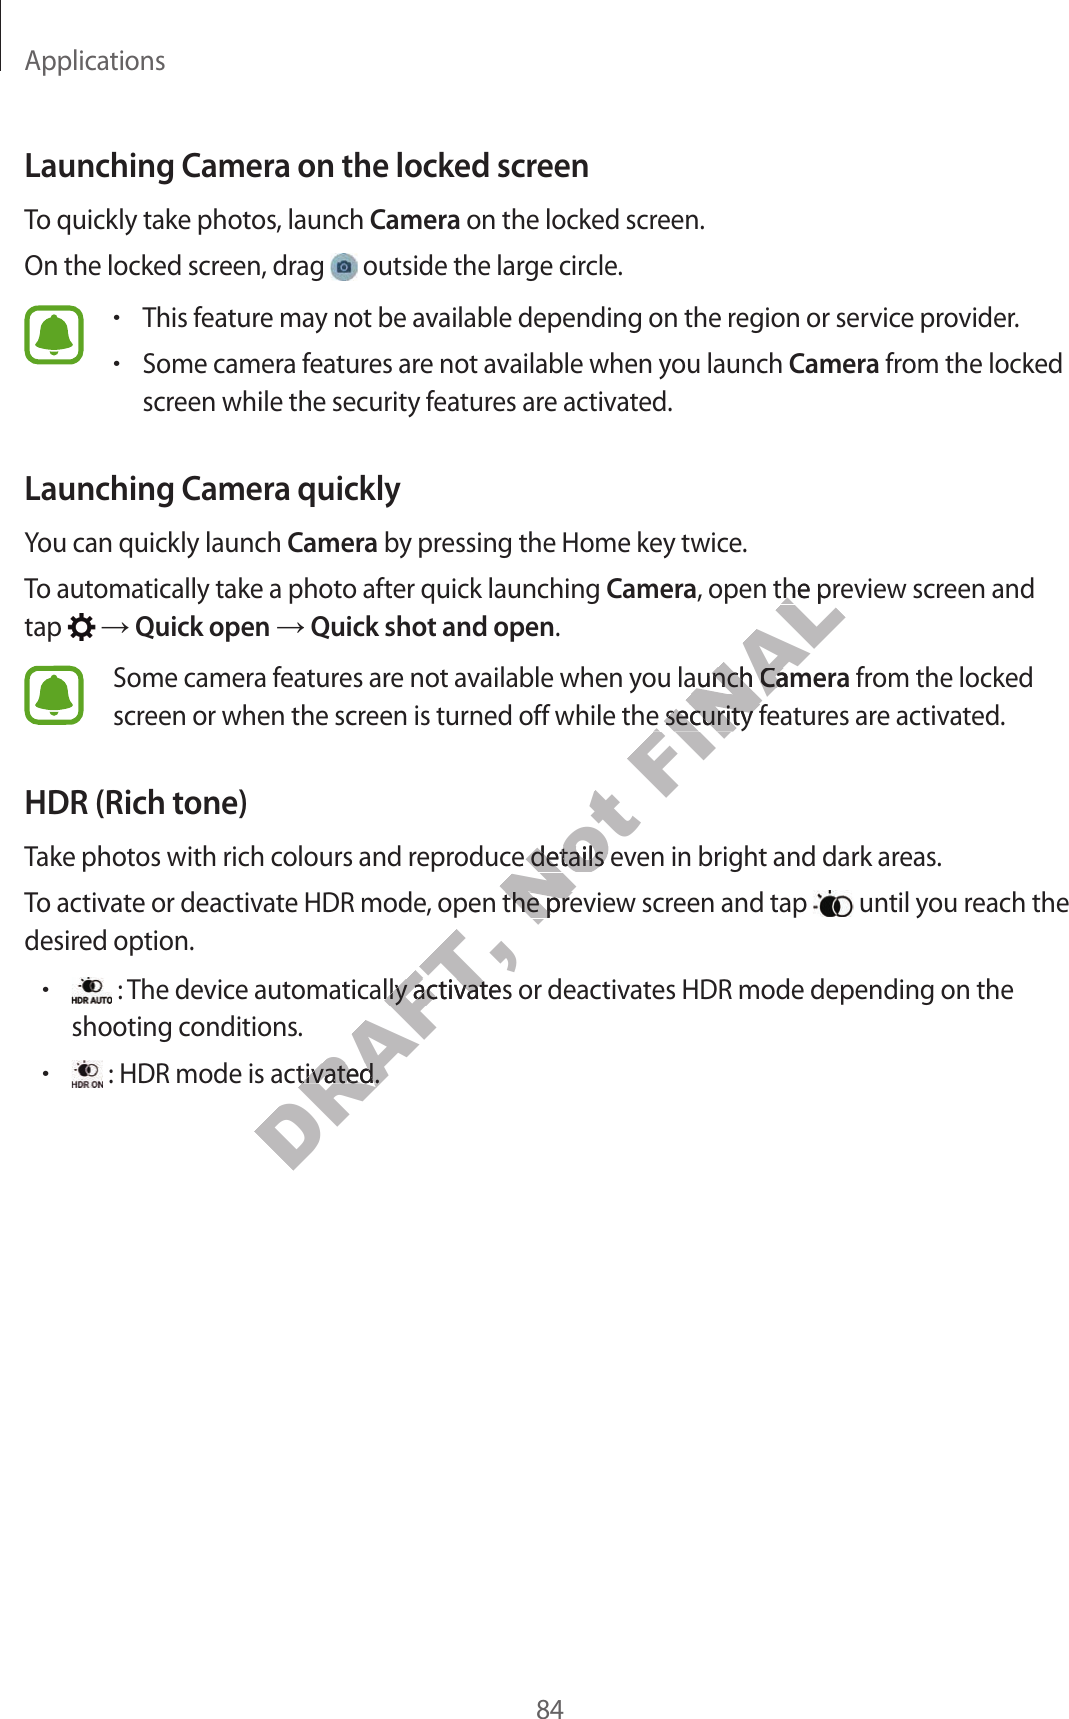 Applications84Launching Camera on the locked screenTo quickly take photos, launch Camera on the locked screen.On the locked screen, drag   outside the large circle.•This feature may not be available depending on the region or service provider.•Some camera features are not available when you launch Camera from the locked screen while the security features are activated.Launching Camera quicklyYou can quickly launch Camera by pressing the Home key twice.To automatically take a photo after quick launching Camera, open the preview screen and tap   ĺ Quick open ĺ Quick shot and open.Some camera features are not available when you launch Camera from the locked screen or when the screen is turned off while the security features are activated.HDR (Rich tone)Take photos with rich colours and reproduce details even in bright and dark areas.To activate or deactivate HDR mode, open the preview screen and tap   until you reach the desired option.• : The device automatically activates or deactivates HDR mode depending on the shooting conditions.• : HDR mode is activated.DRAFT, , open the prtically activates or deactically activat : HDR mode is activated. : HDR mode is activated.Not oduce details evoduce details ev, open the preview scr, open the preview scrFINAL, open the pr, open the prou launch ou launch CamerCamerned off while the security fned off while the security f